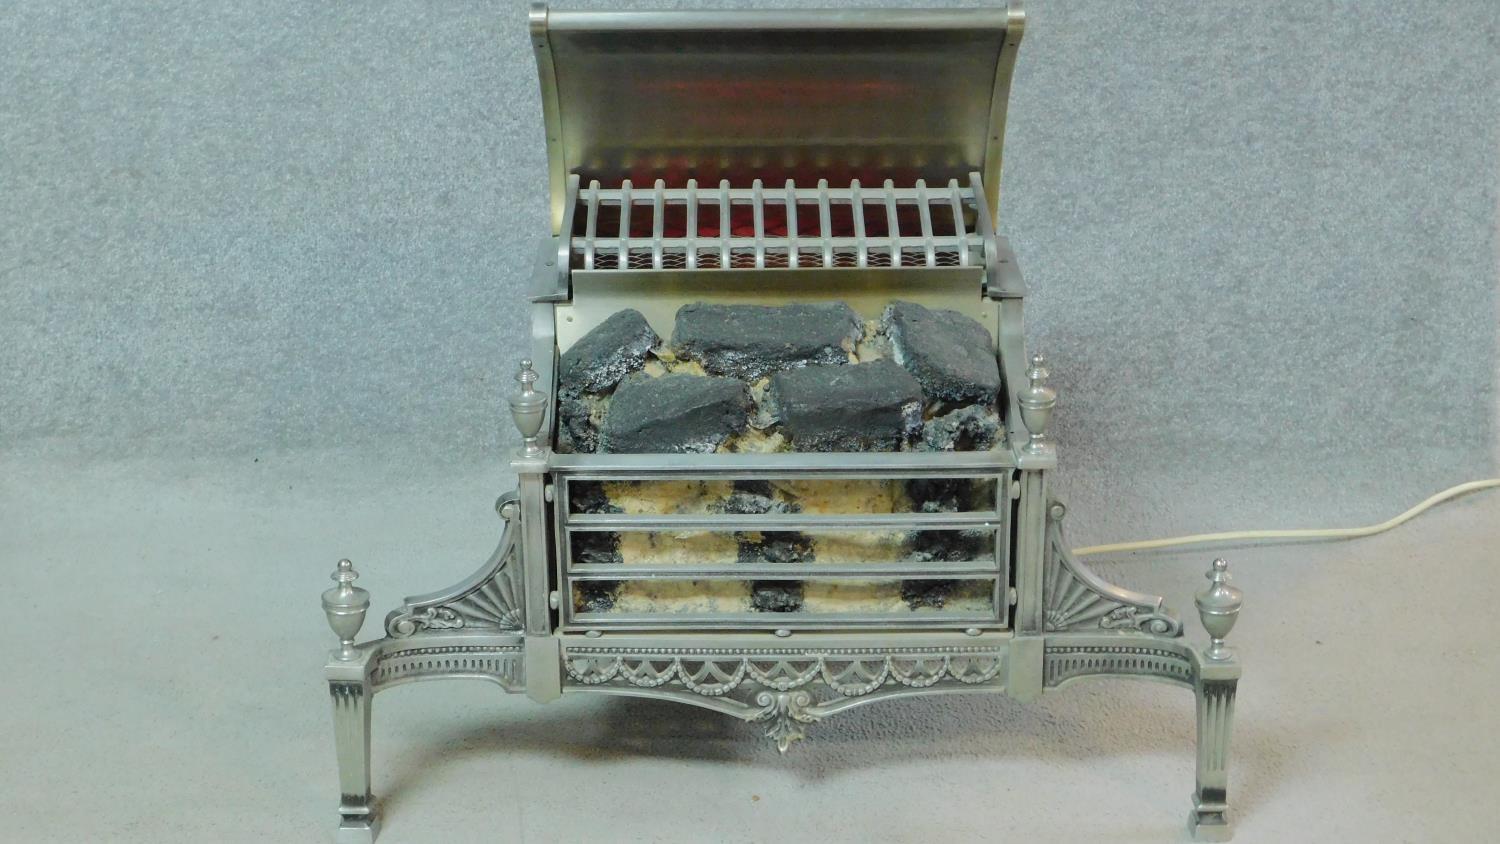 A Belling electric fire in the style of a Regency fire basket with andirons. H.71 W.80 D.45cm